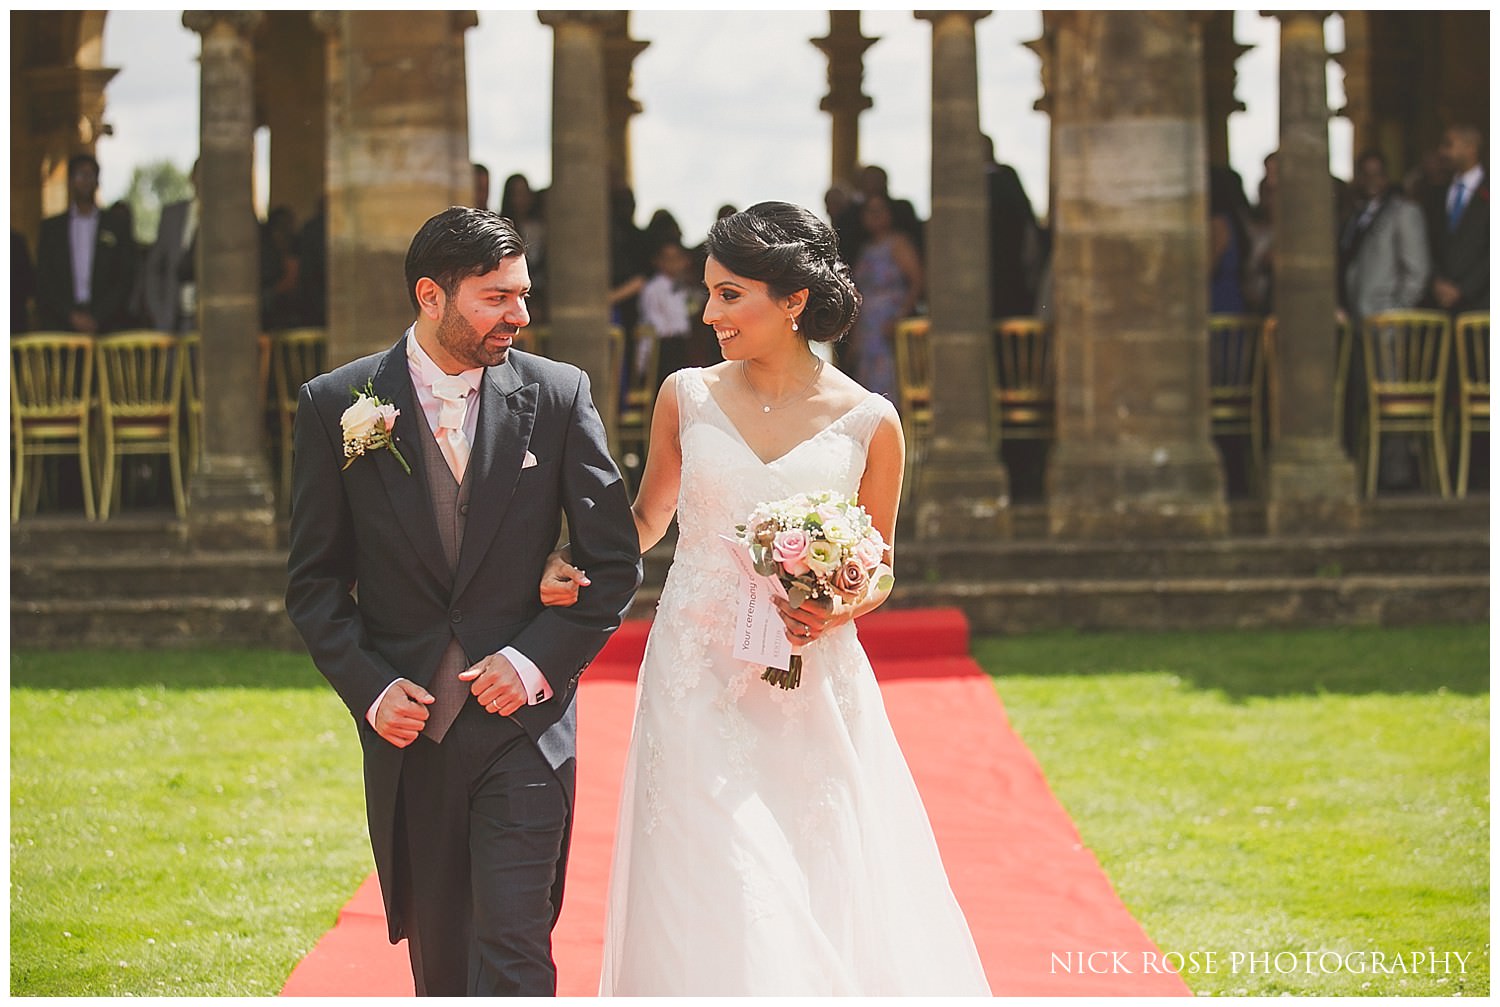  Bride and groom walking down the aisle after a wedding ceremony at Hever Castle Kent 